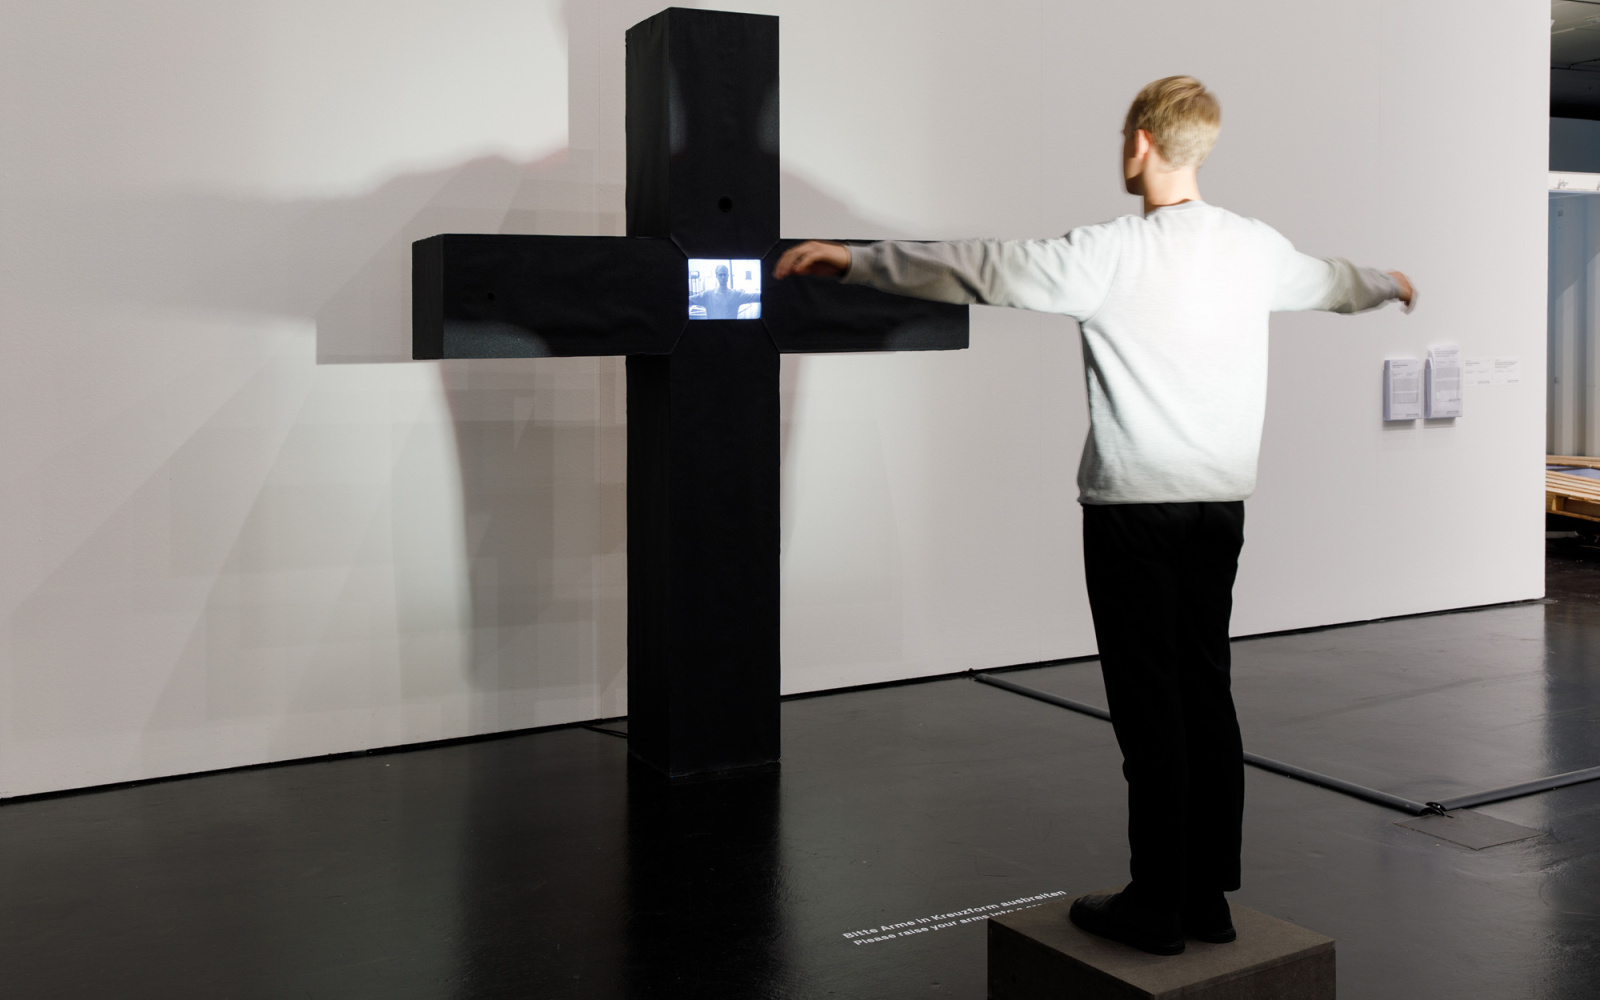 Peter Weibel's interactive video culture: A massive black cross. Where the struts of the cross meet is a monitor. On the monitor you can see the person standing in front of the cross, stretching out his arms as if he himself was hanging there.